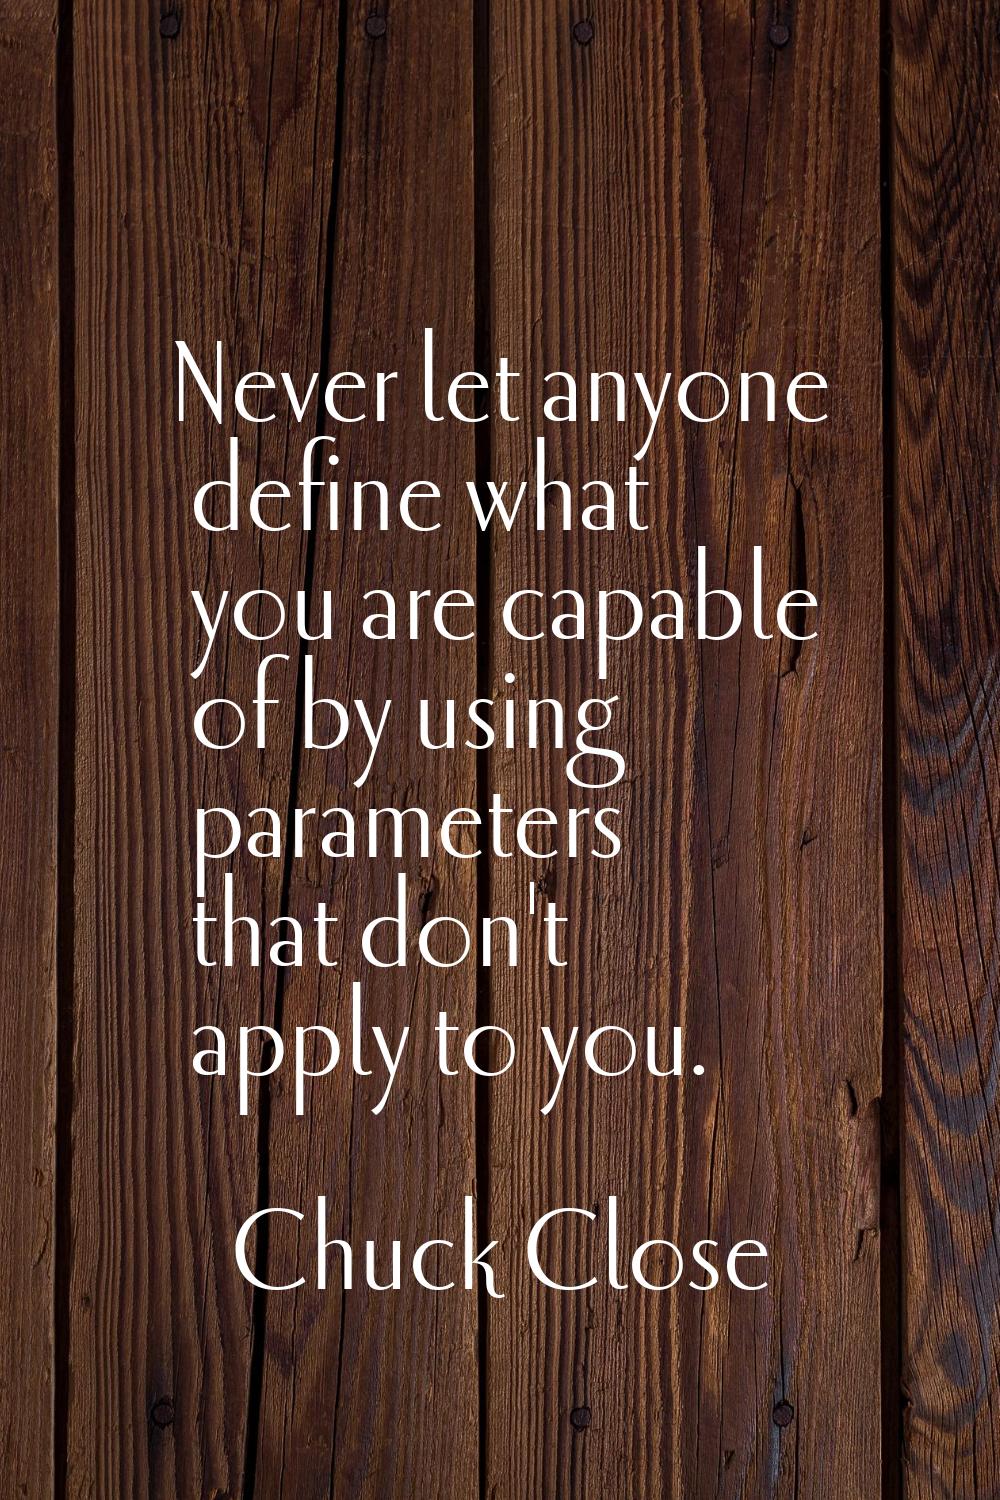 Never let anyone define what you are capable of by using parameters that don't apply to you.